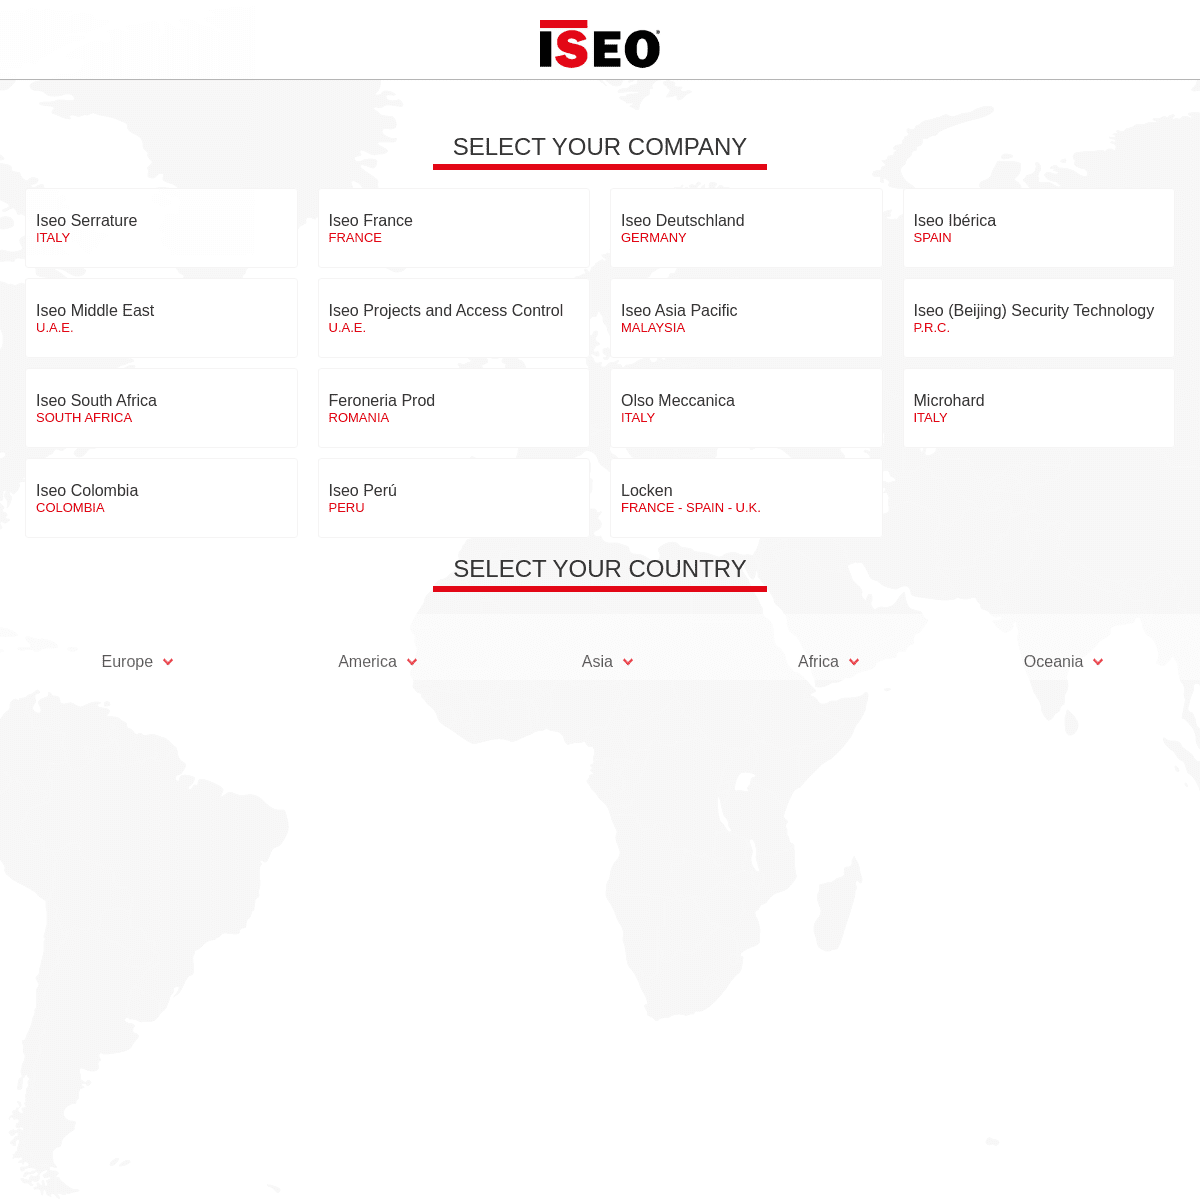 A complete backup of https://iseo.com